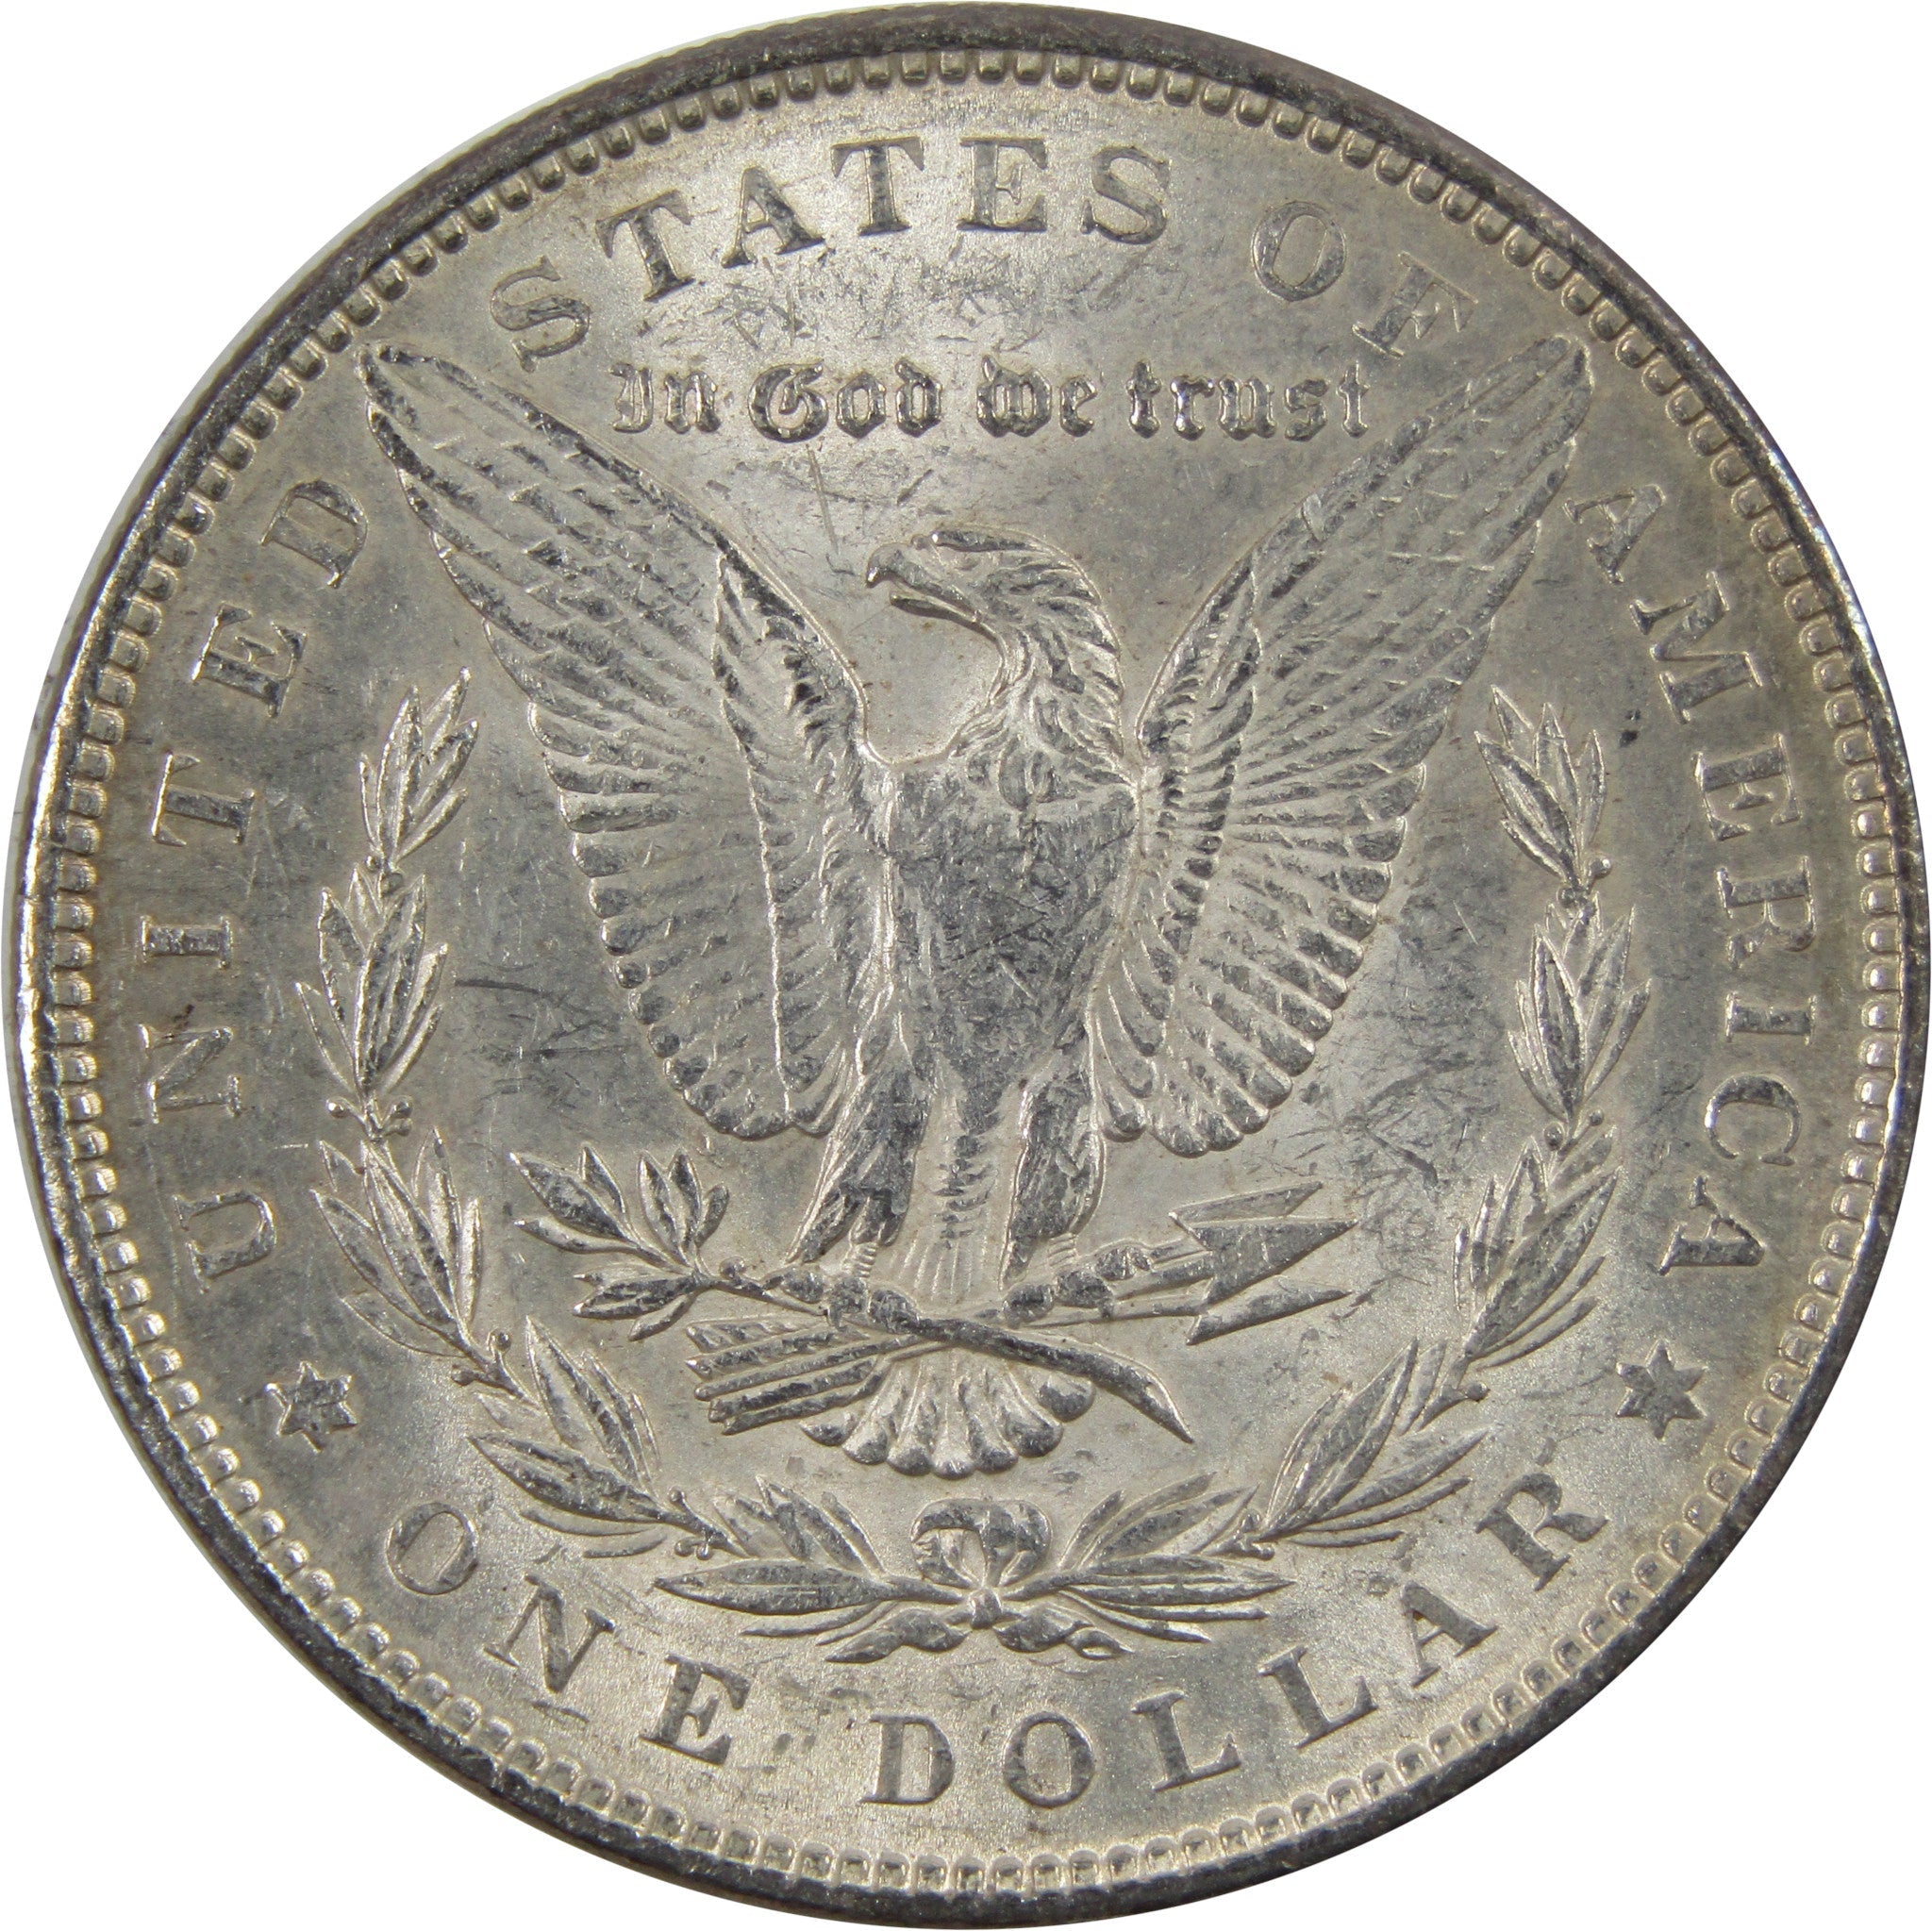 1888 Morgan Dollar AU About Uncirculated 90% Silver $1 Coin SKU:I5499 - Morgan coin - Morgan silver dollar - Morgan silver dollar for sale - Profile Coins &amp; Collectibles